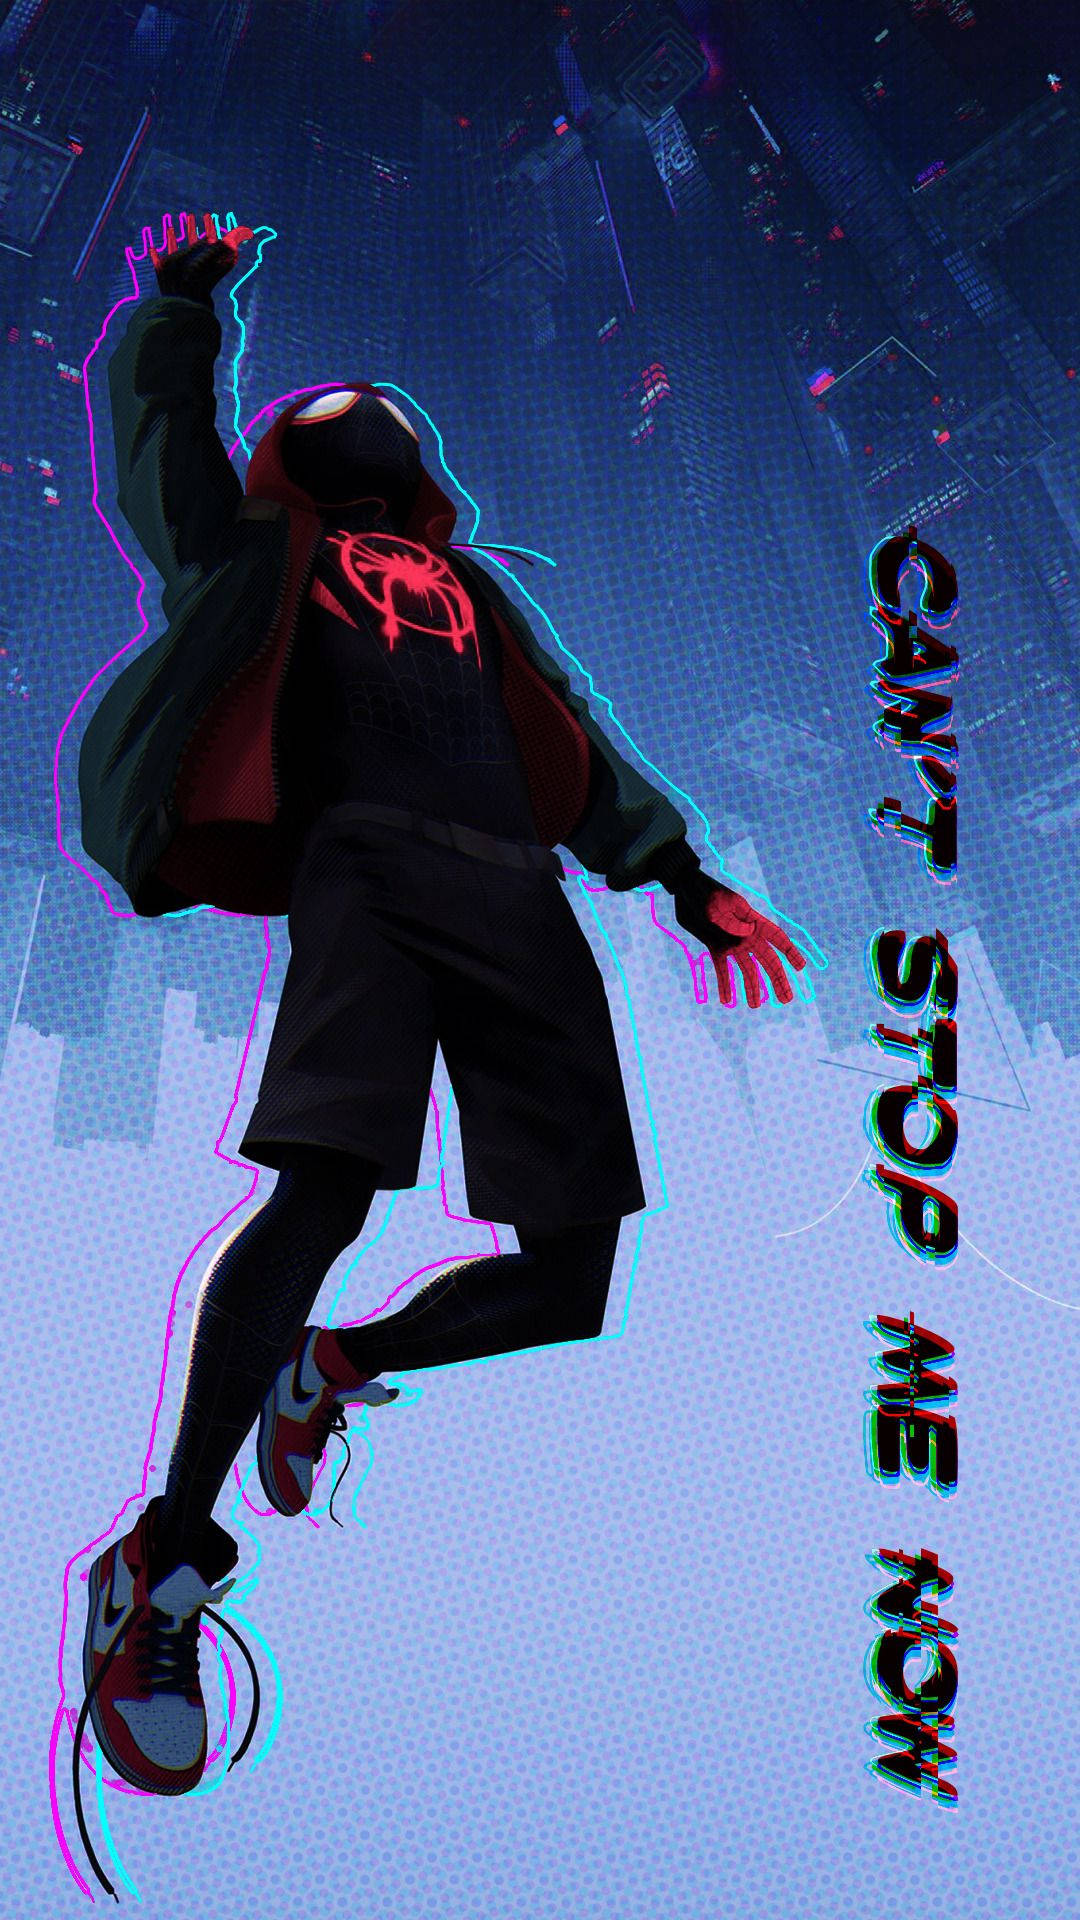 Top 999+ Miles Morales Wallpaper Full HD, 4K✅Free to Use